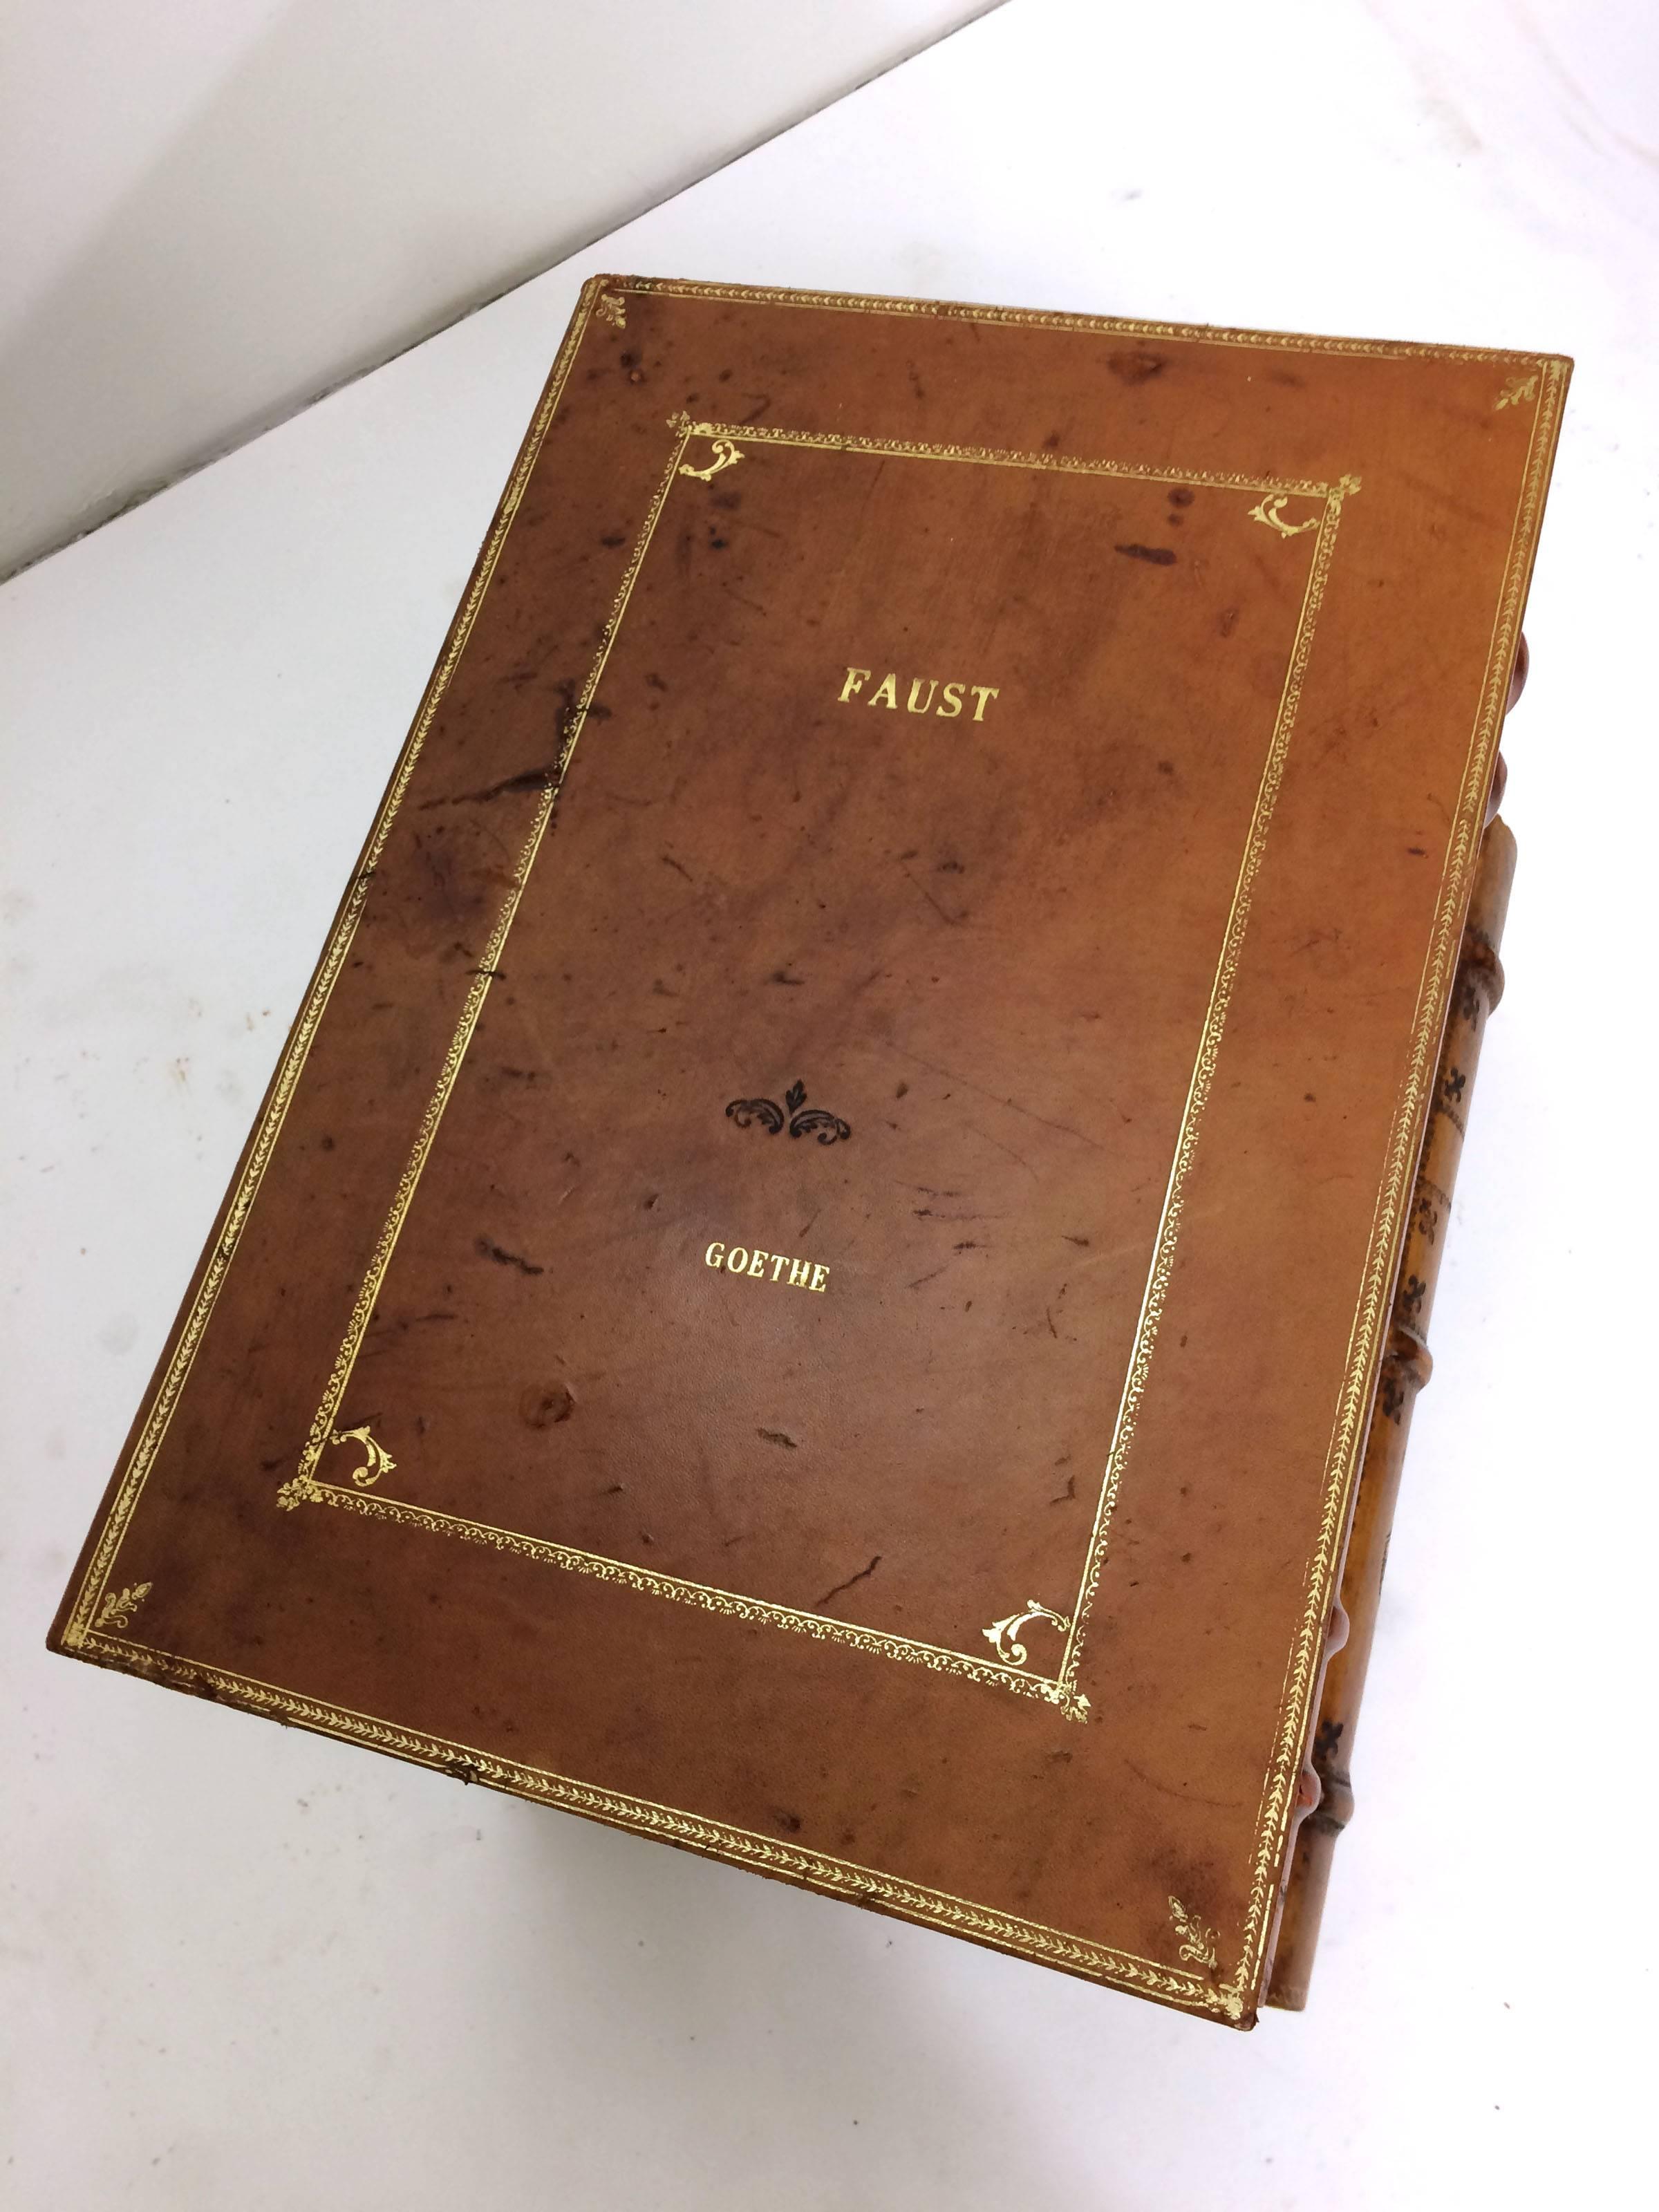 End table in the form of a stack of leather bound antique books including Goethe's Faust as the top layer, and including other volumes by Dante and Byron. In genuine bound leather and gilt paint over wood, it features an interior storage trunk and